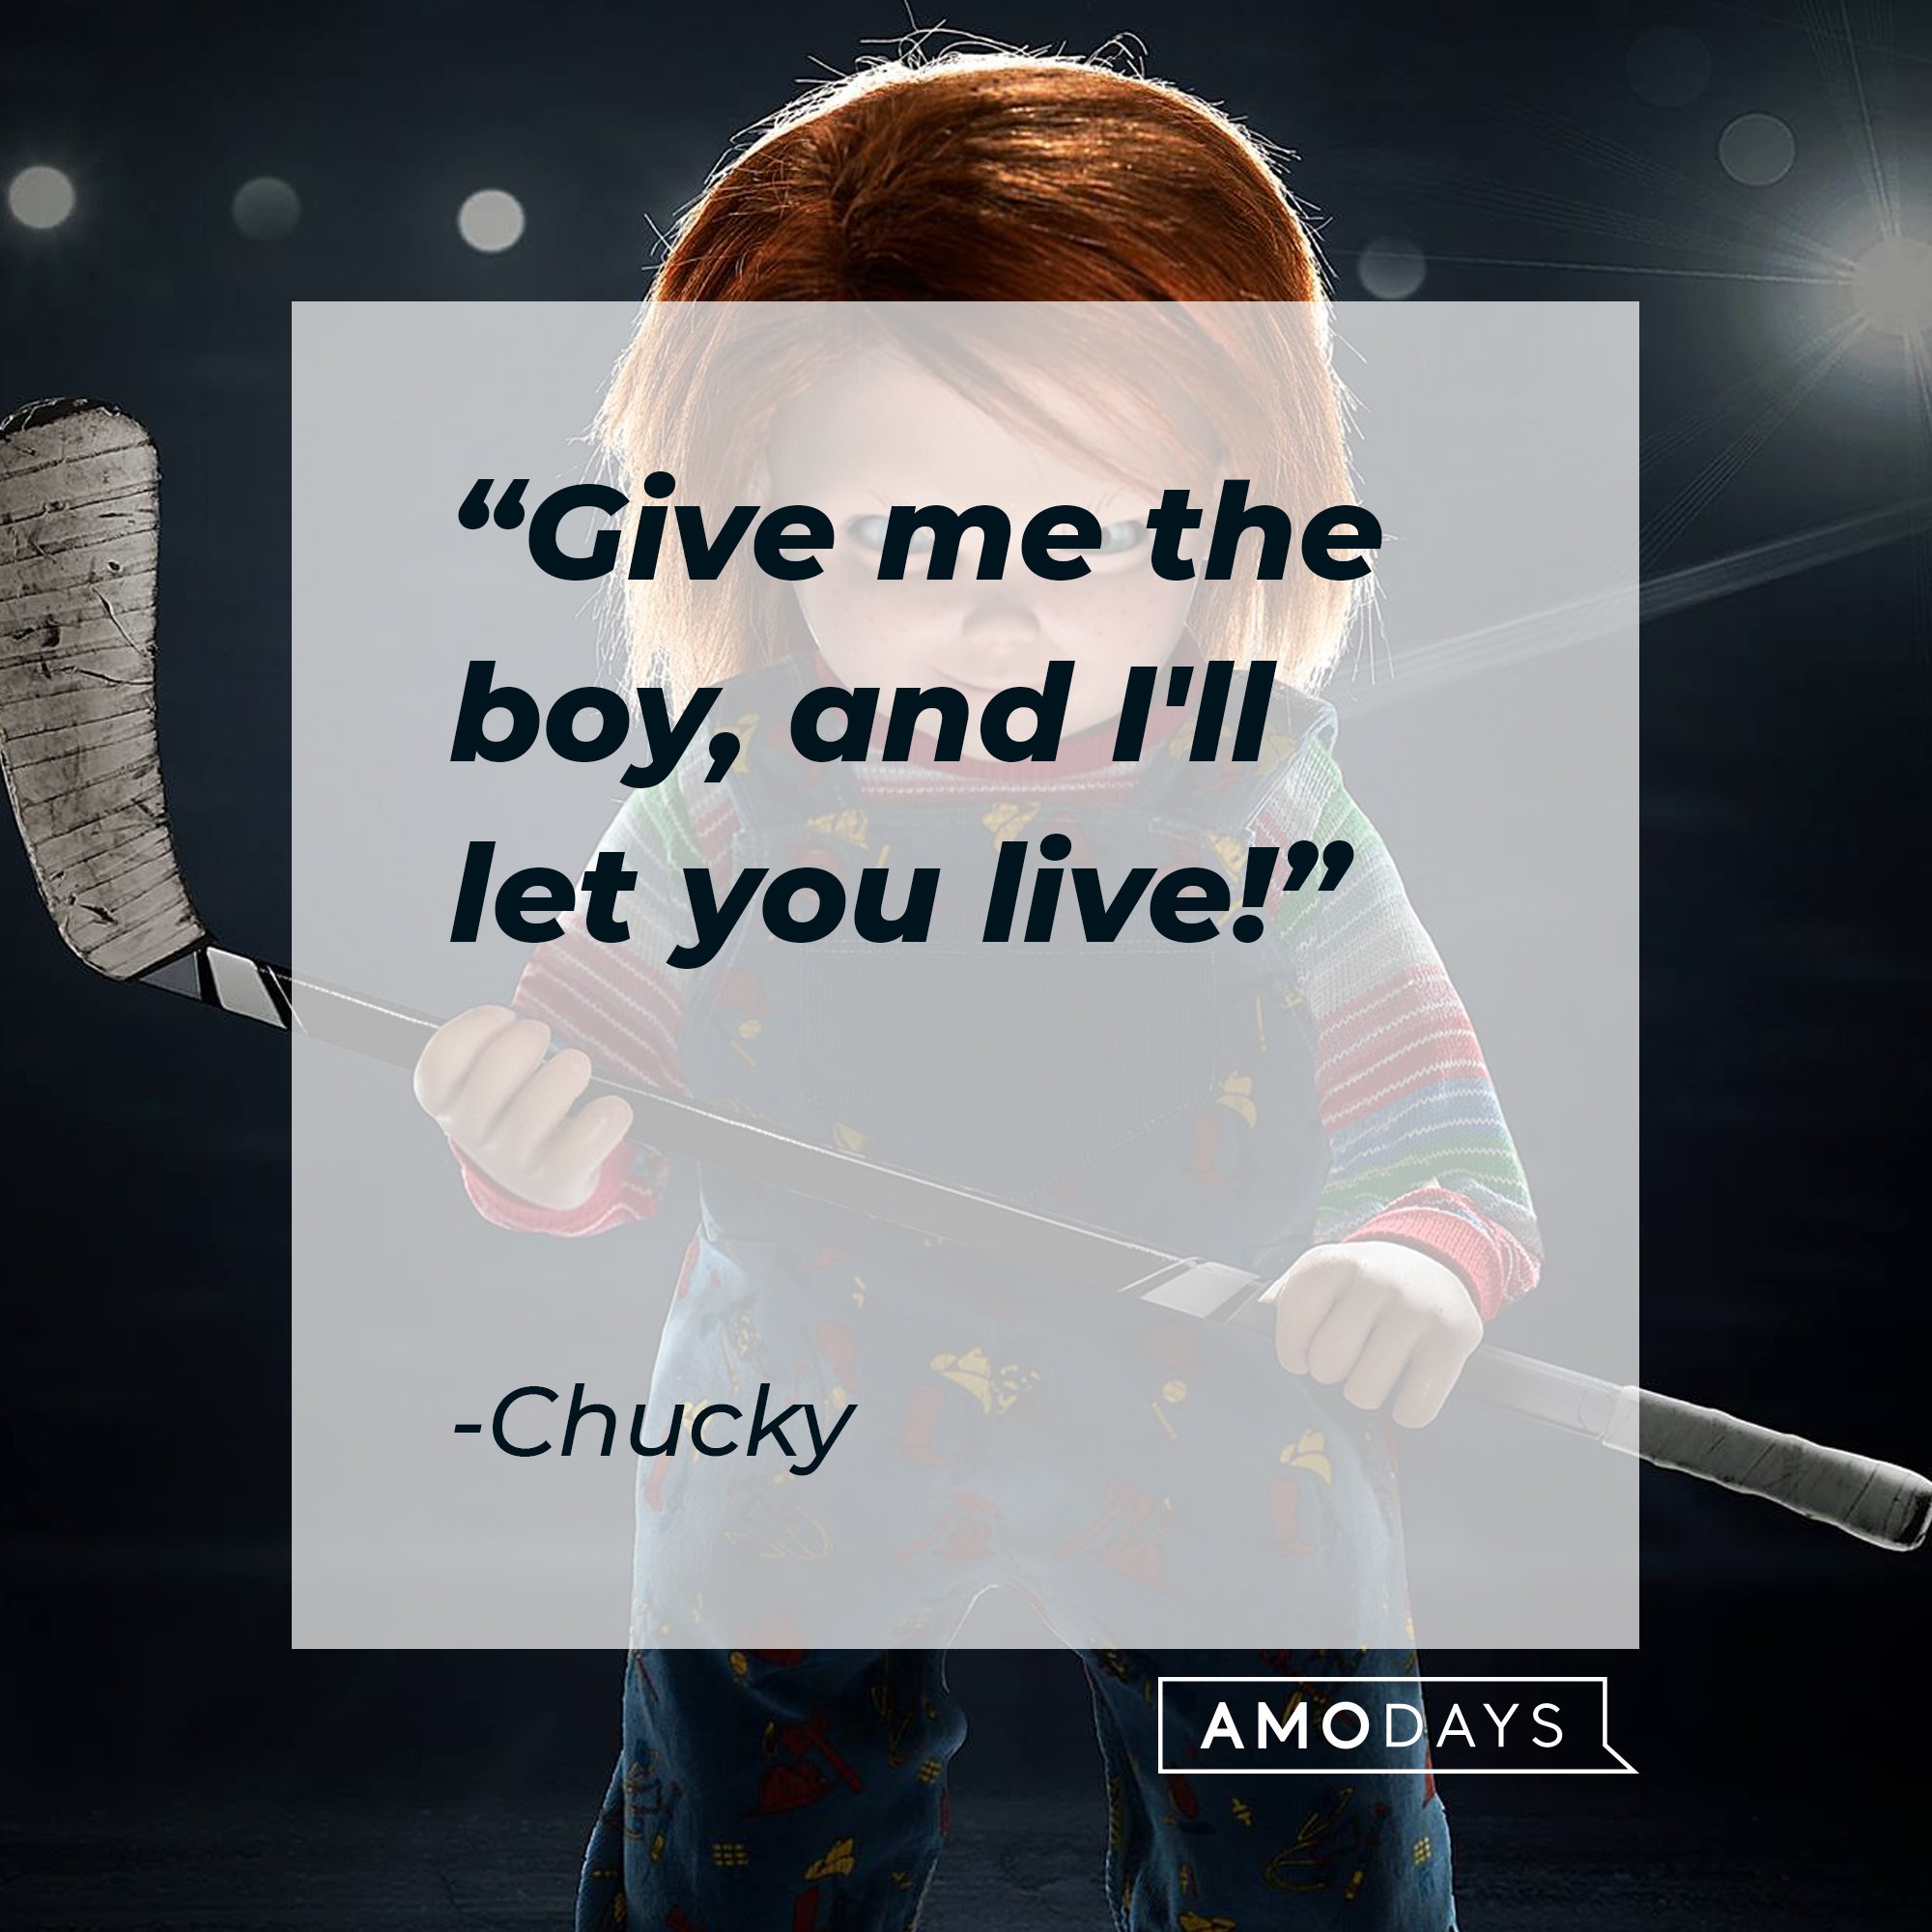 Chucky's quote: "Give me the boy, and I'll let you live!" | Image: AmoDays